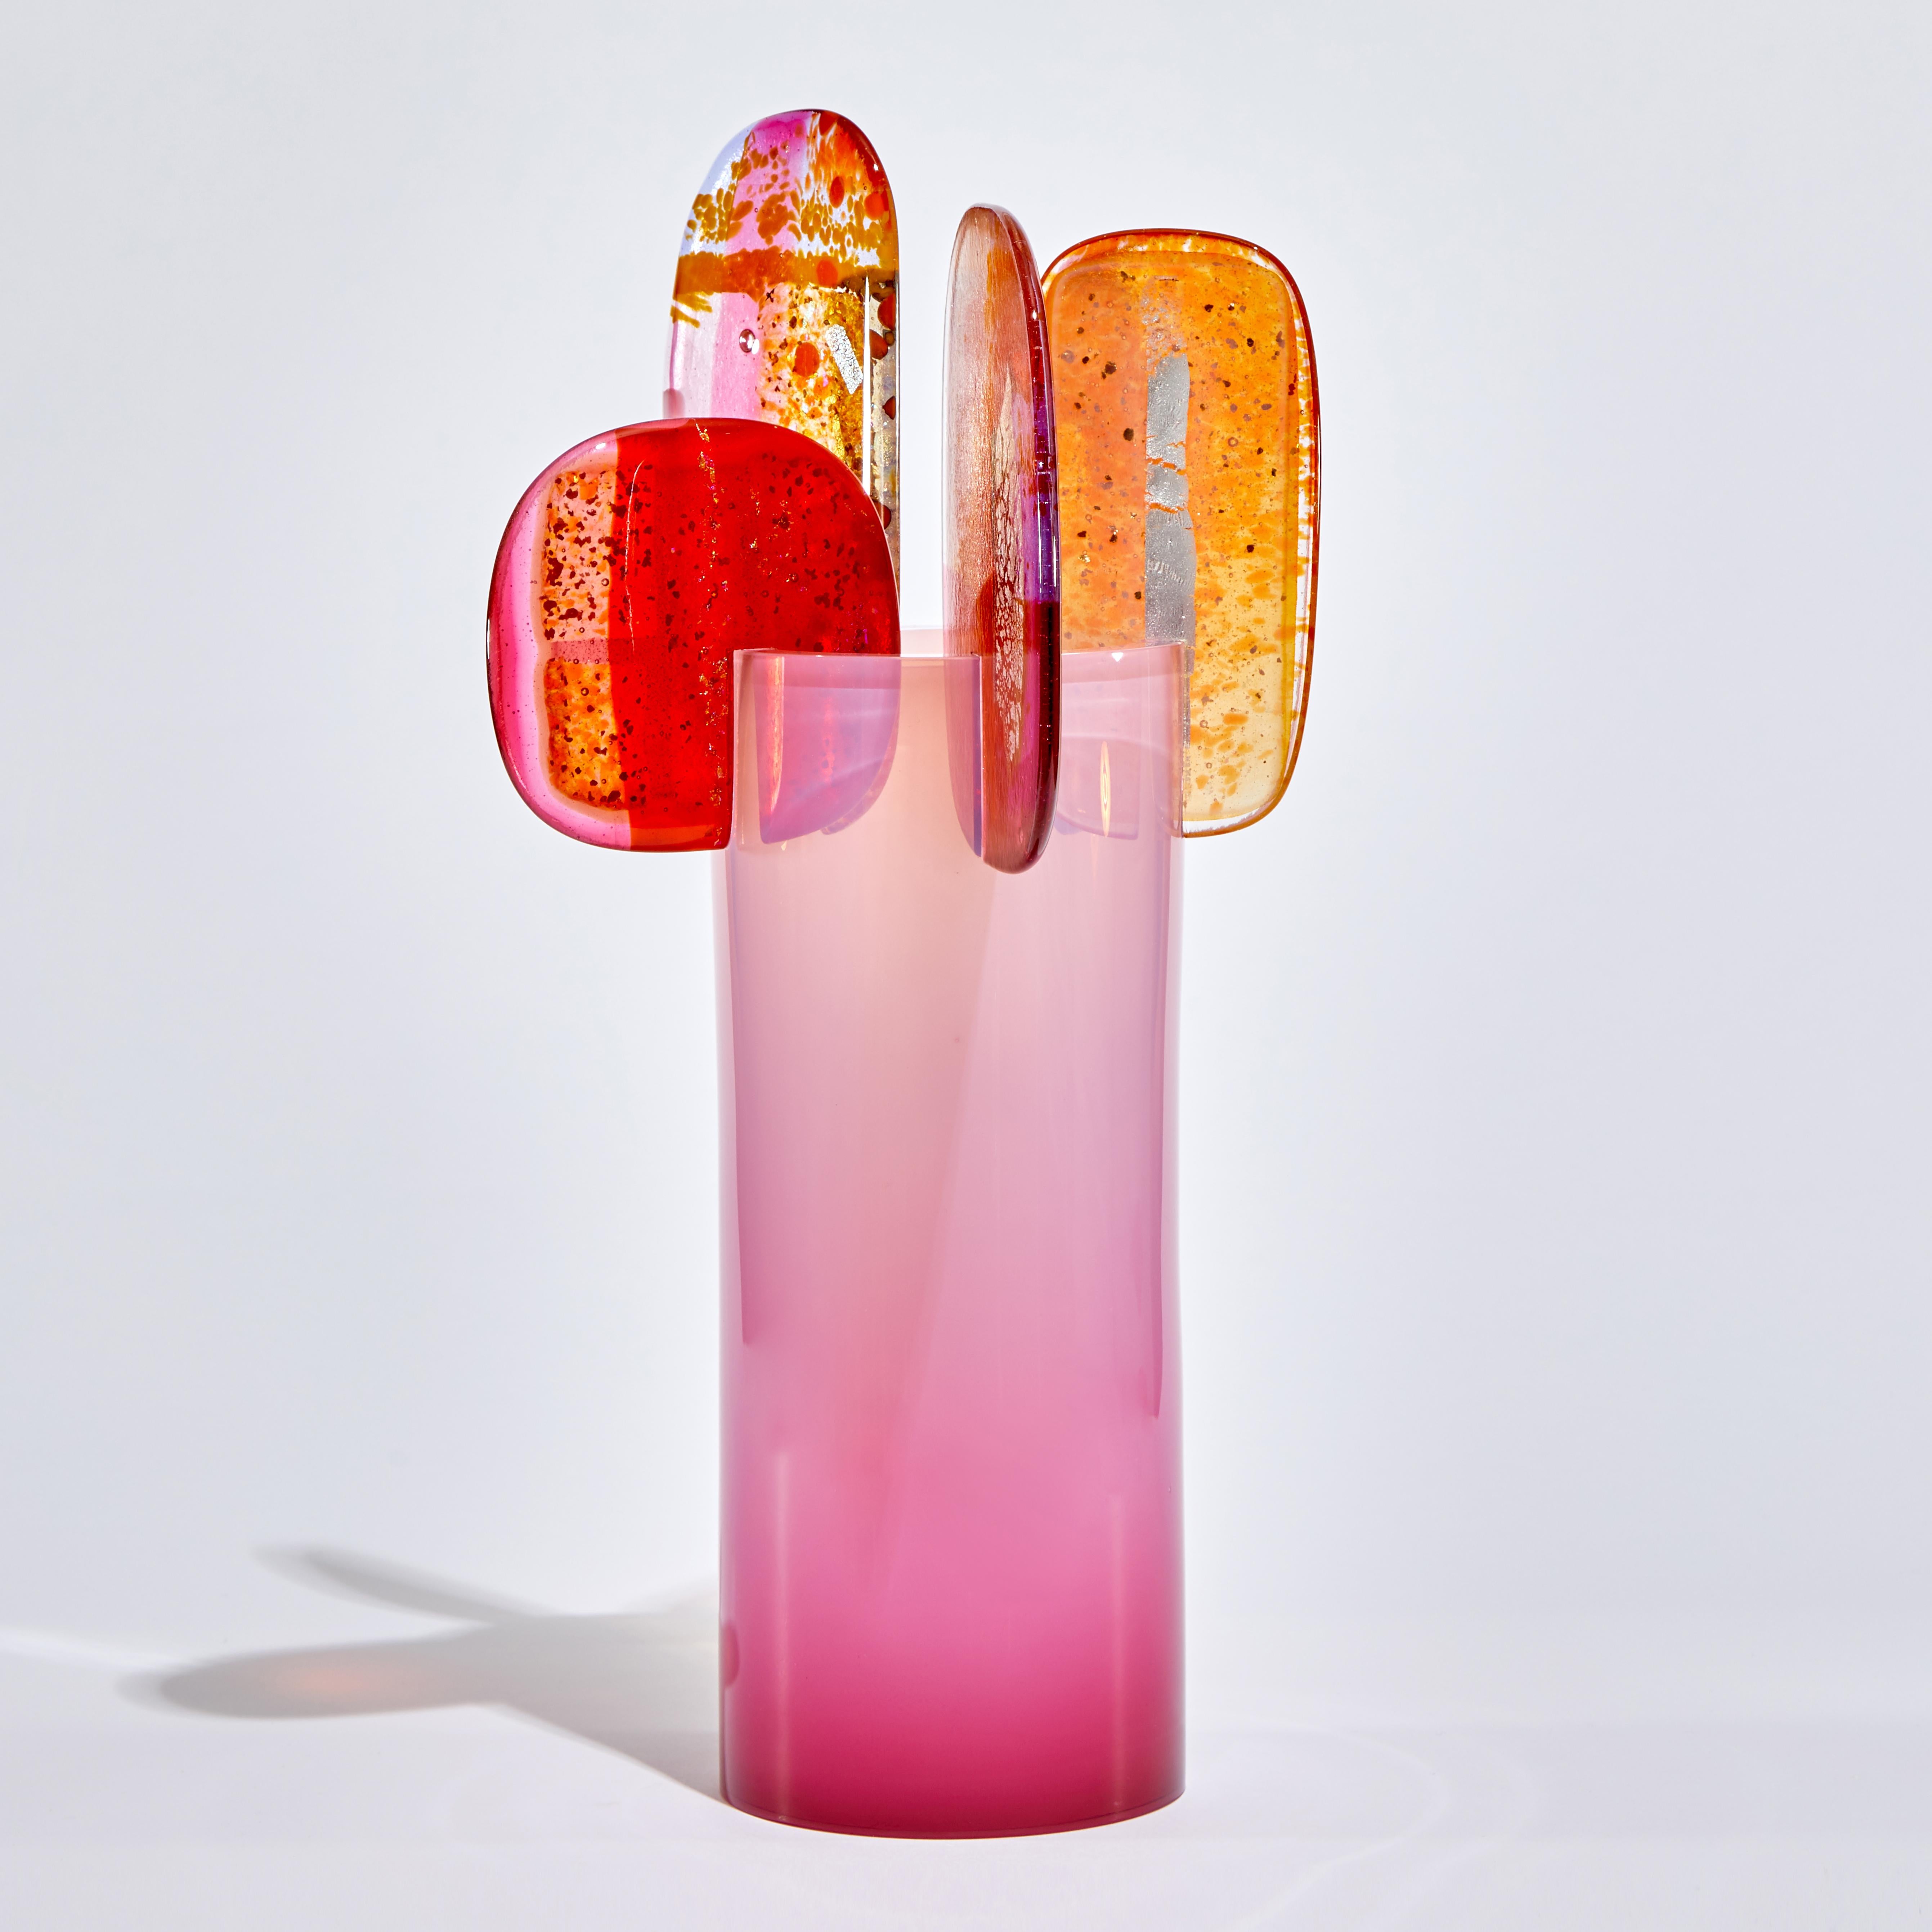 Organic Modern Paradise 01 in Pink, a Unique Pink & Orange Glass Sculpture by Amy Cushing